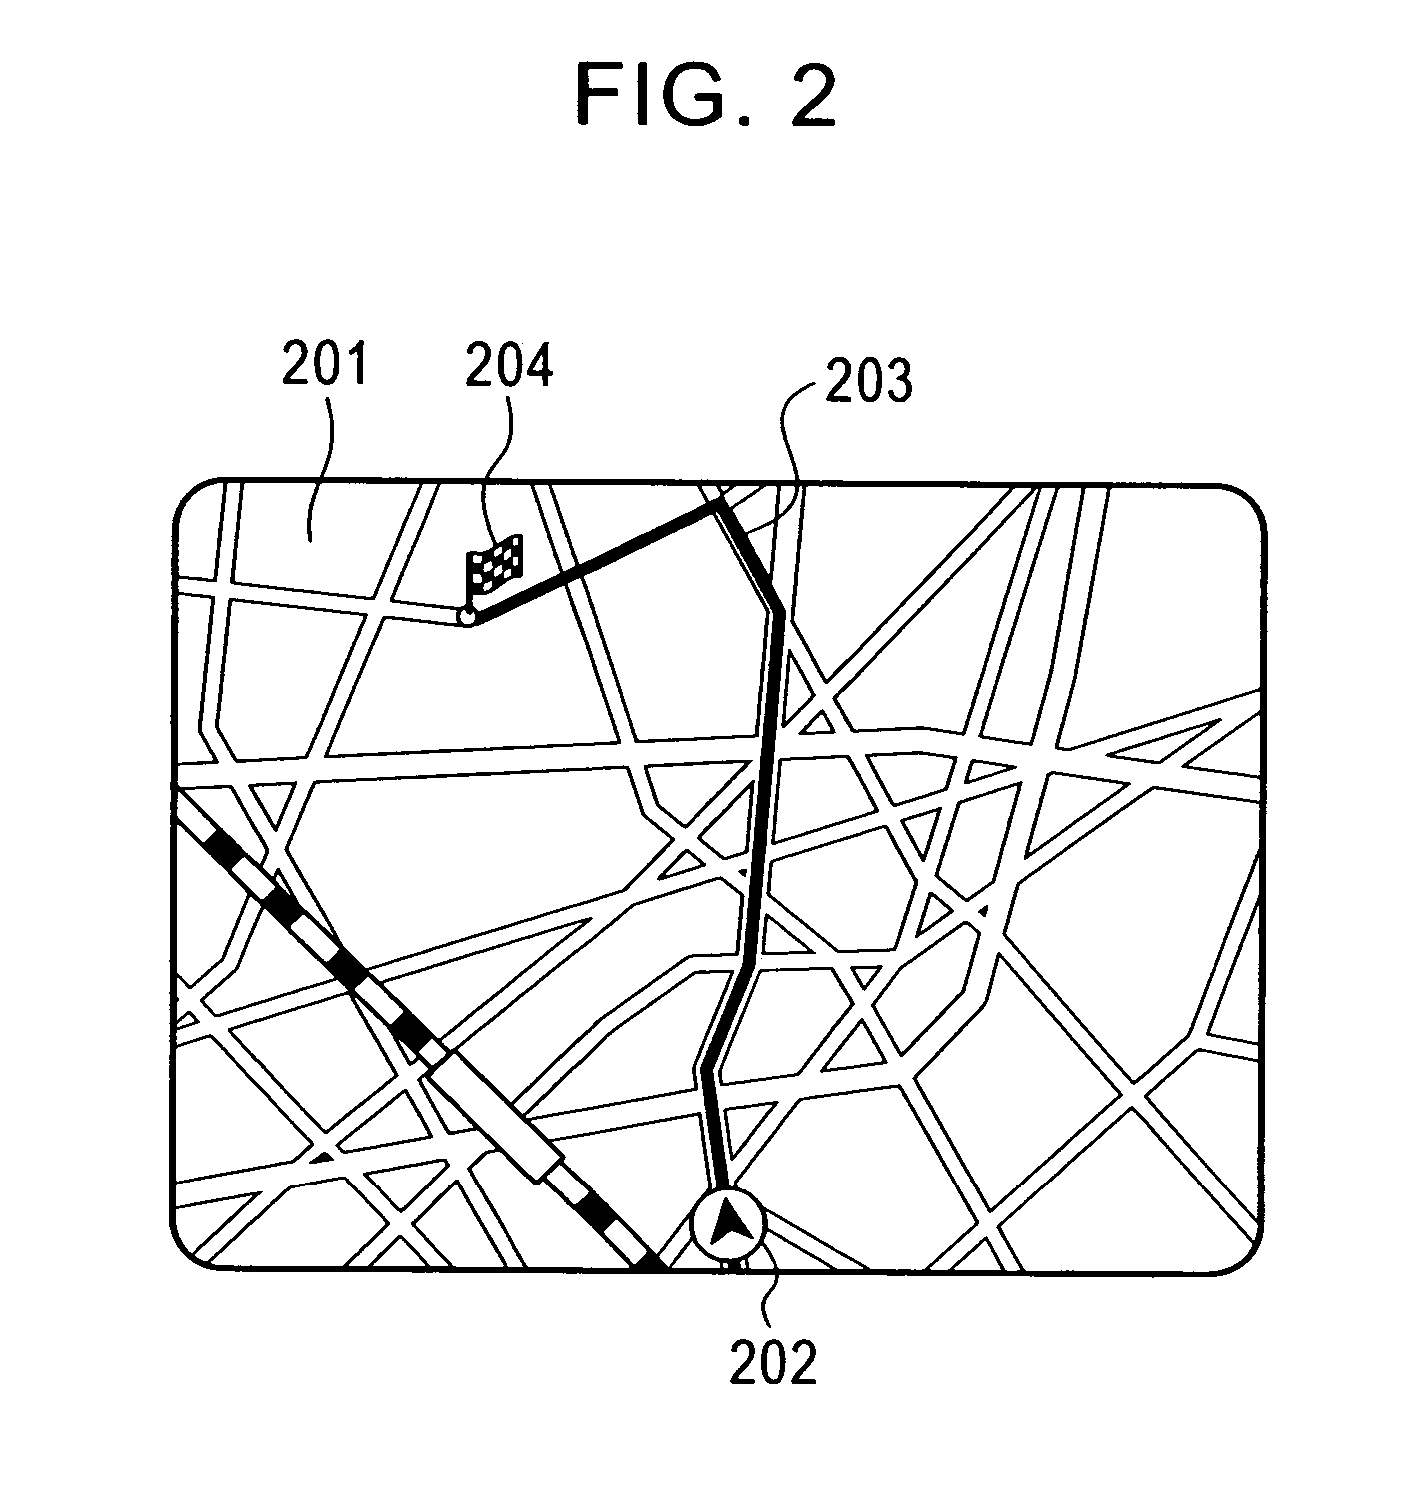 Method and apparatus for satellite positioning